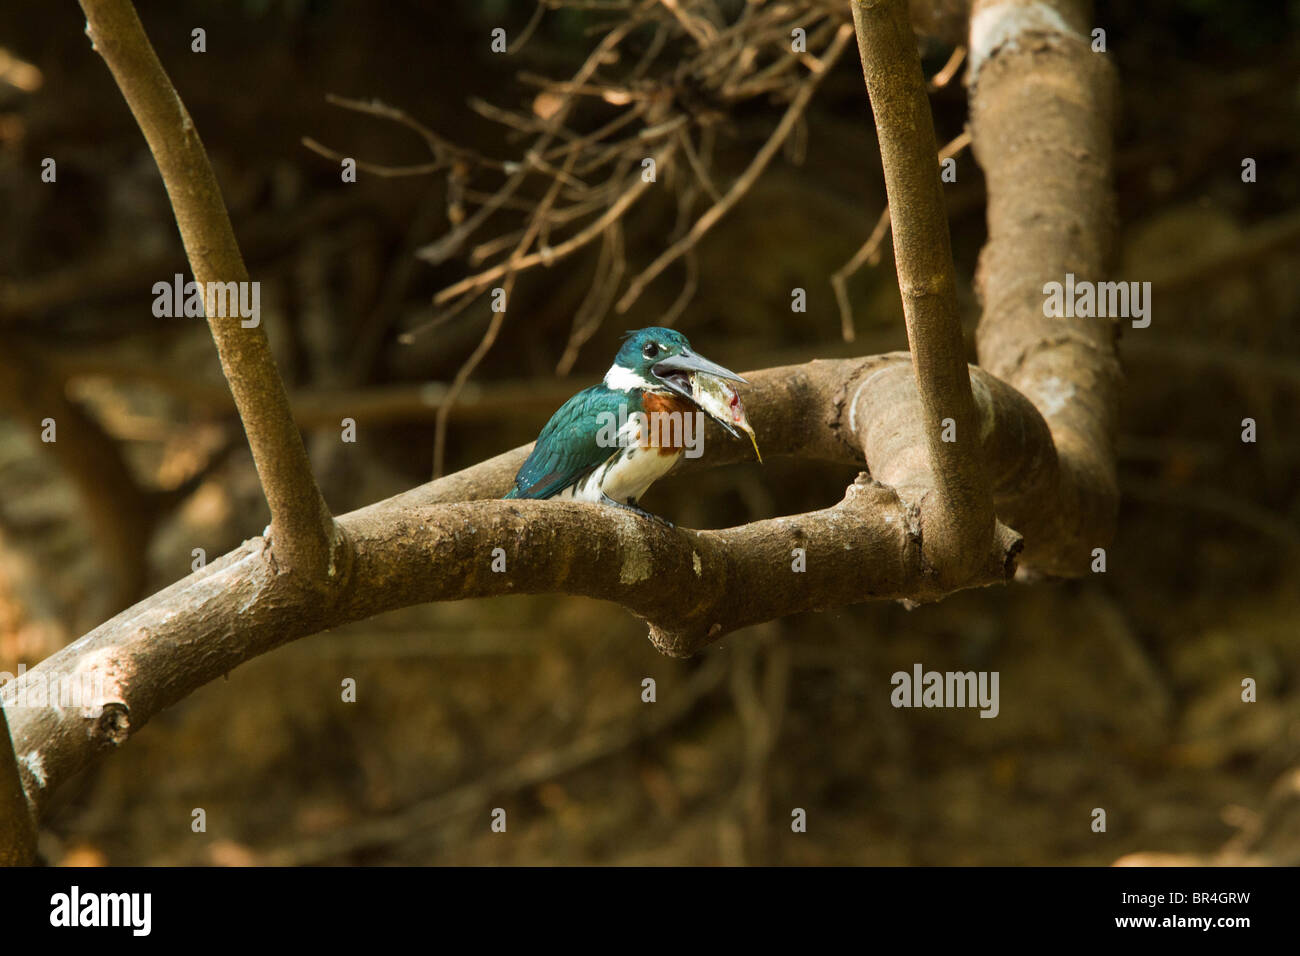 Amazon kingfisher bird eating a fish while perched on a branch in the Brazil Pantanal Stock Photo